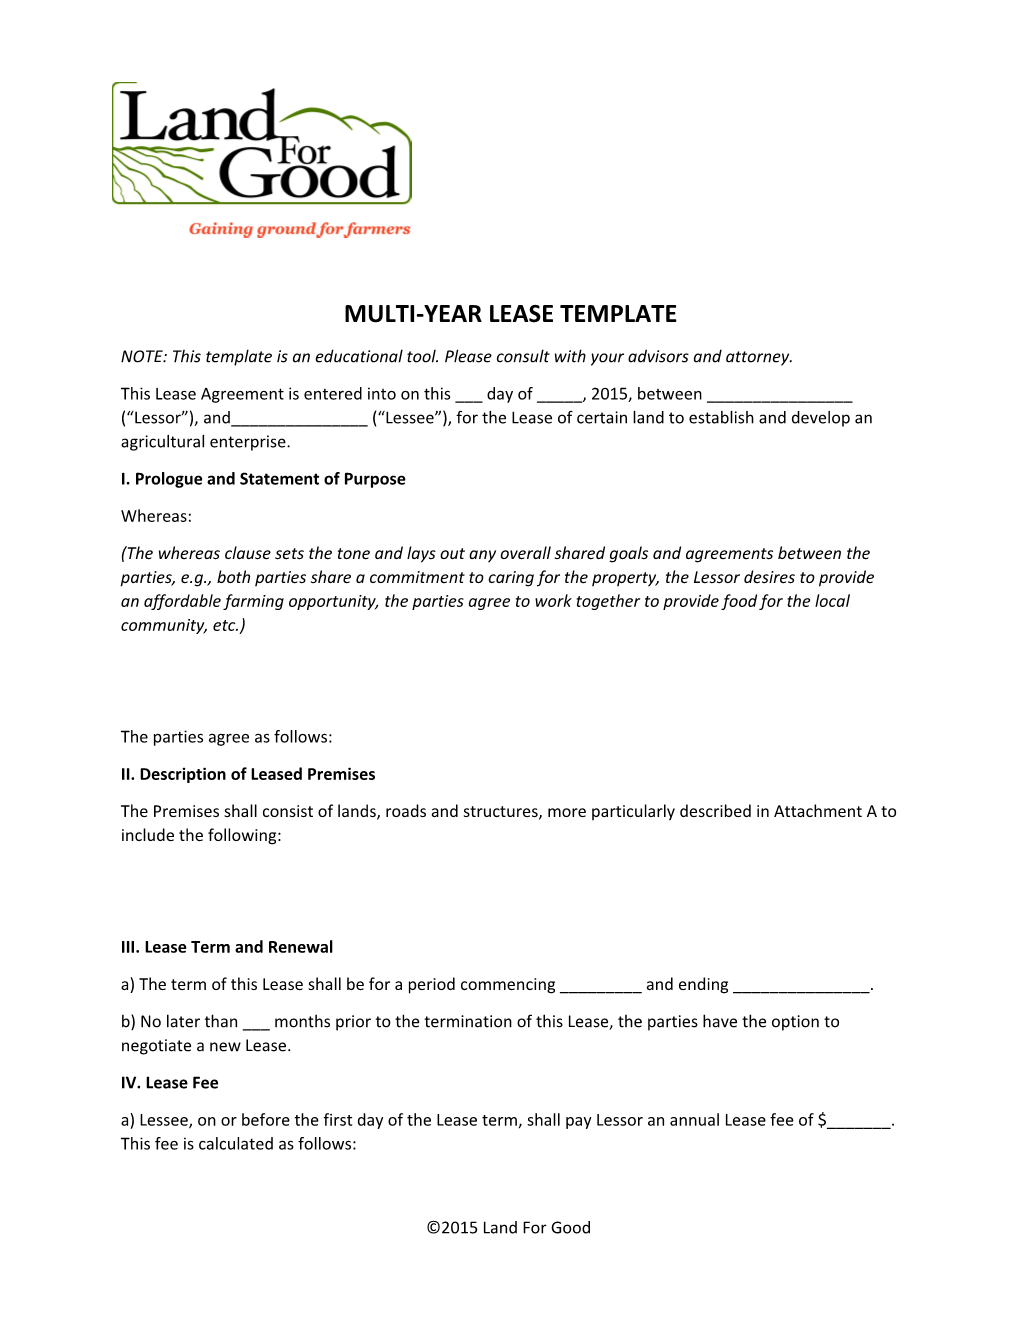 Multi-Year Lease Template